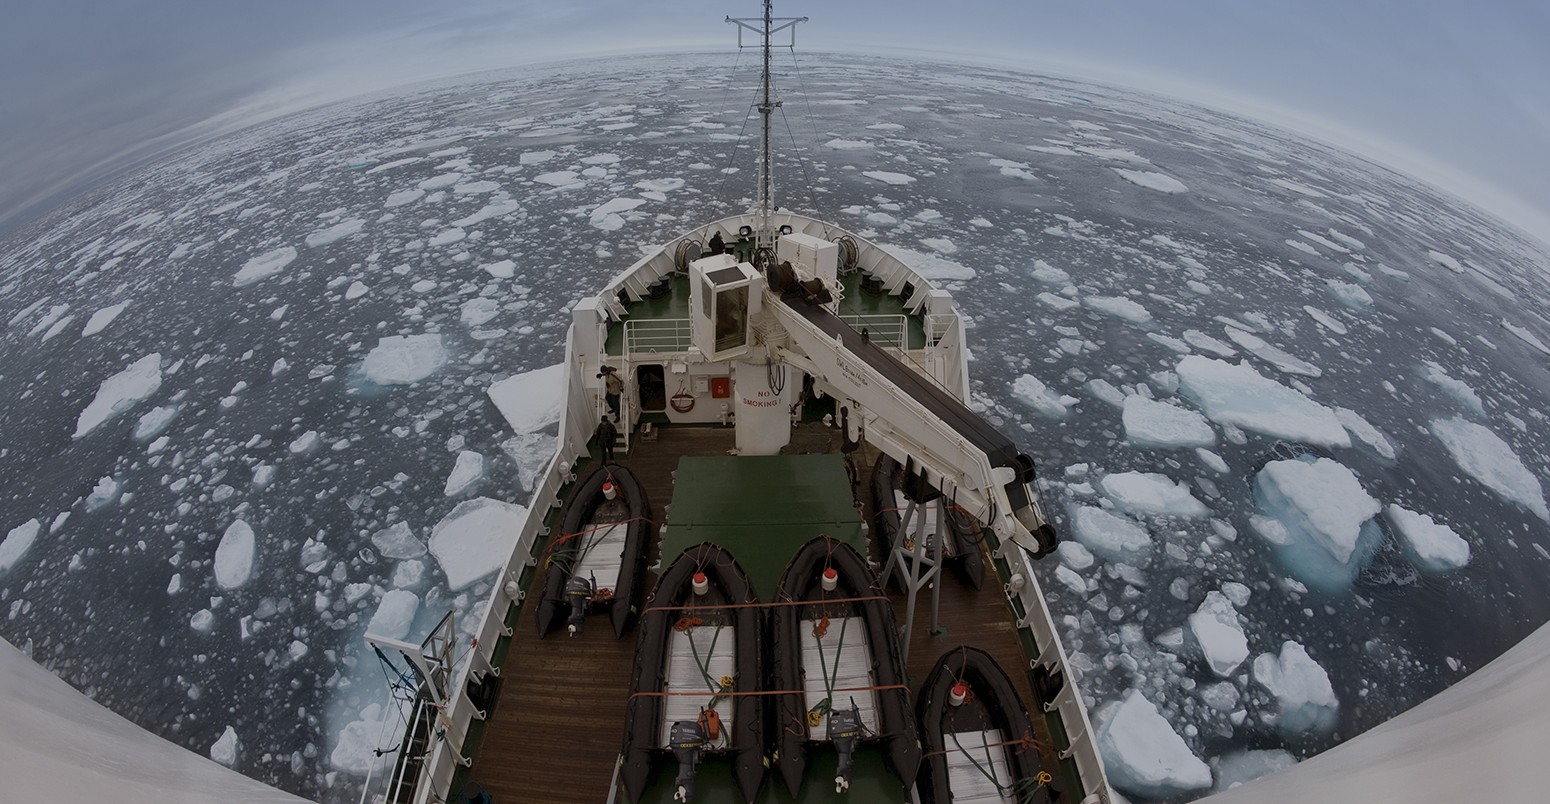 Fish-eye lens view of sea ice off the coast of Spitsbergen